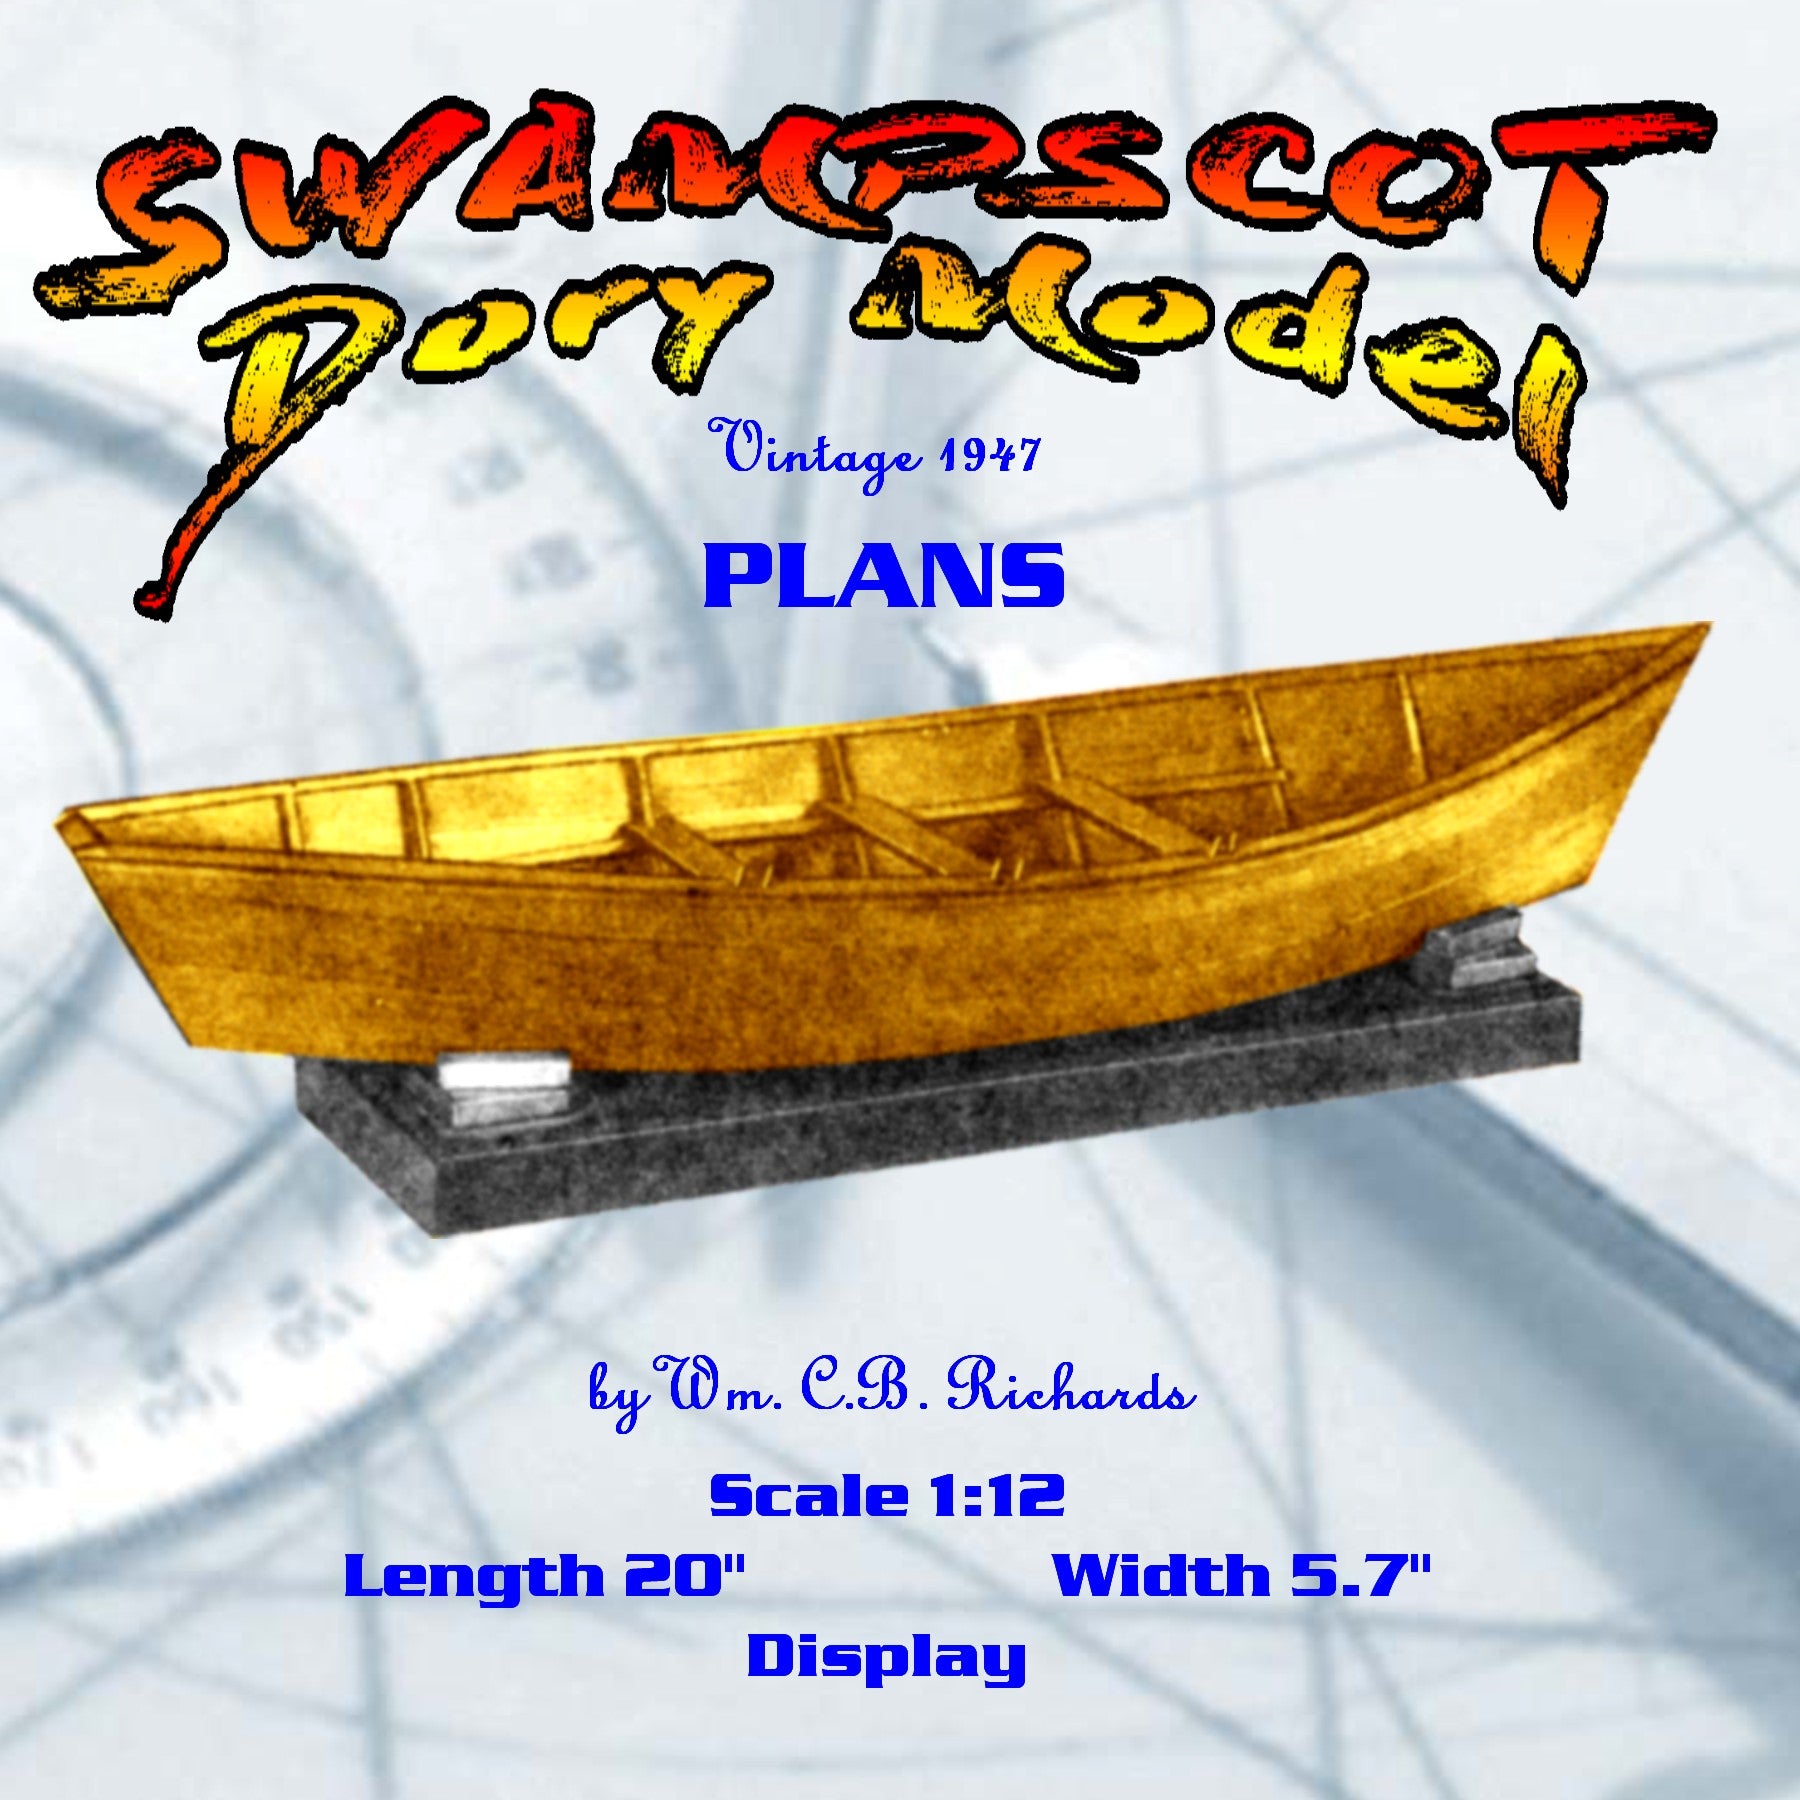 full size printed plan vintage 1947 scale 1:12 "swampscot dory model" a fisherman's model